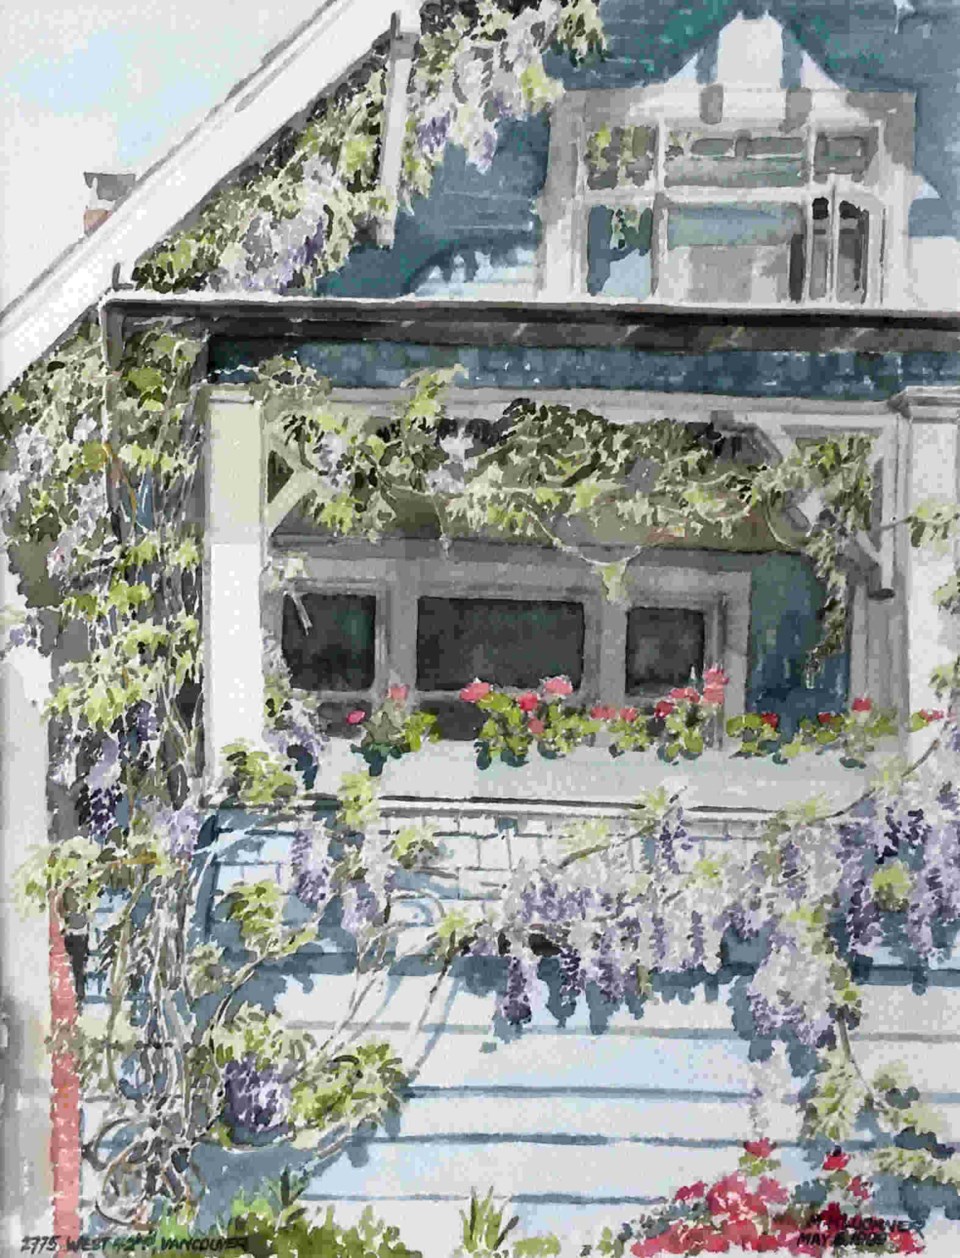  Christine Allen's Kerrisdale house in May, 1989, with wisteria climbing all over it. Painting by Michael Kluckner.